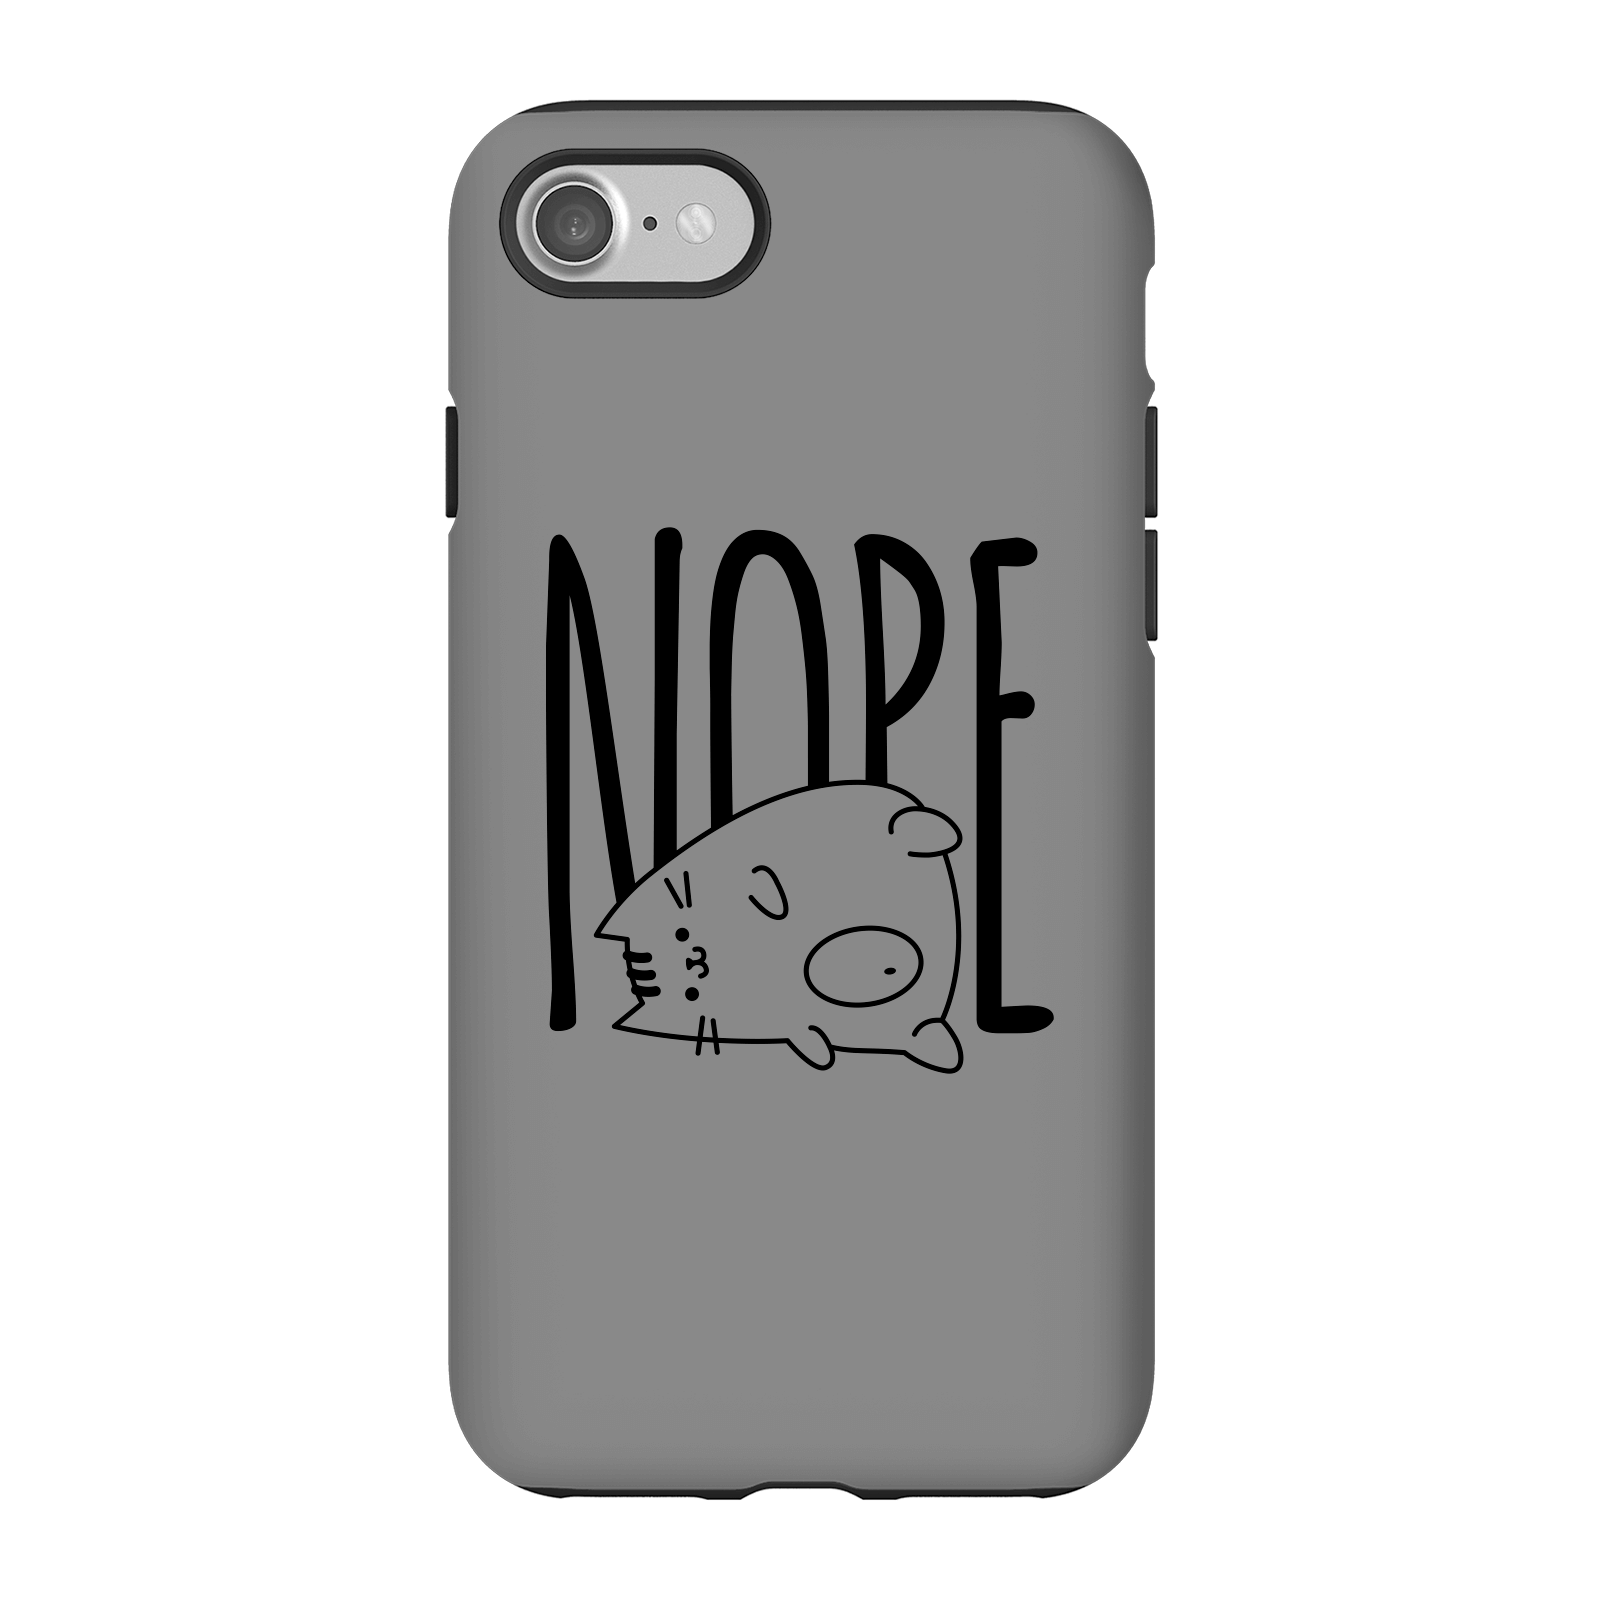 Nope Phone Case for iPhone and Android - iPhone 7 - Tough Case - Gloss